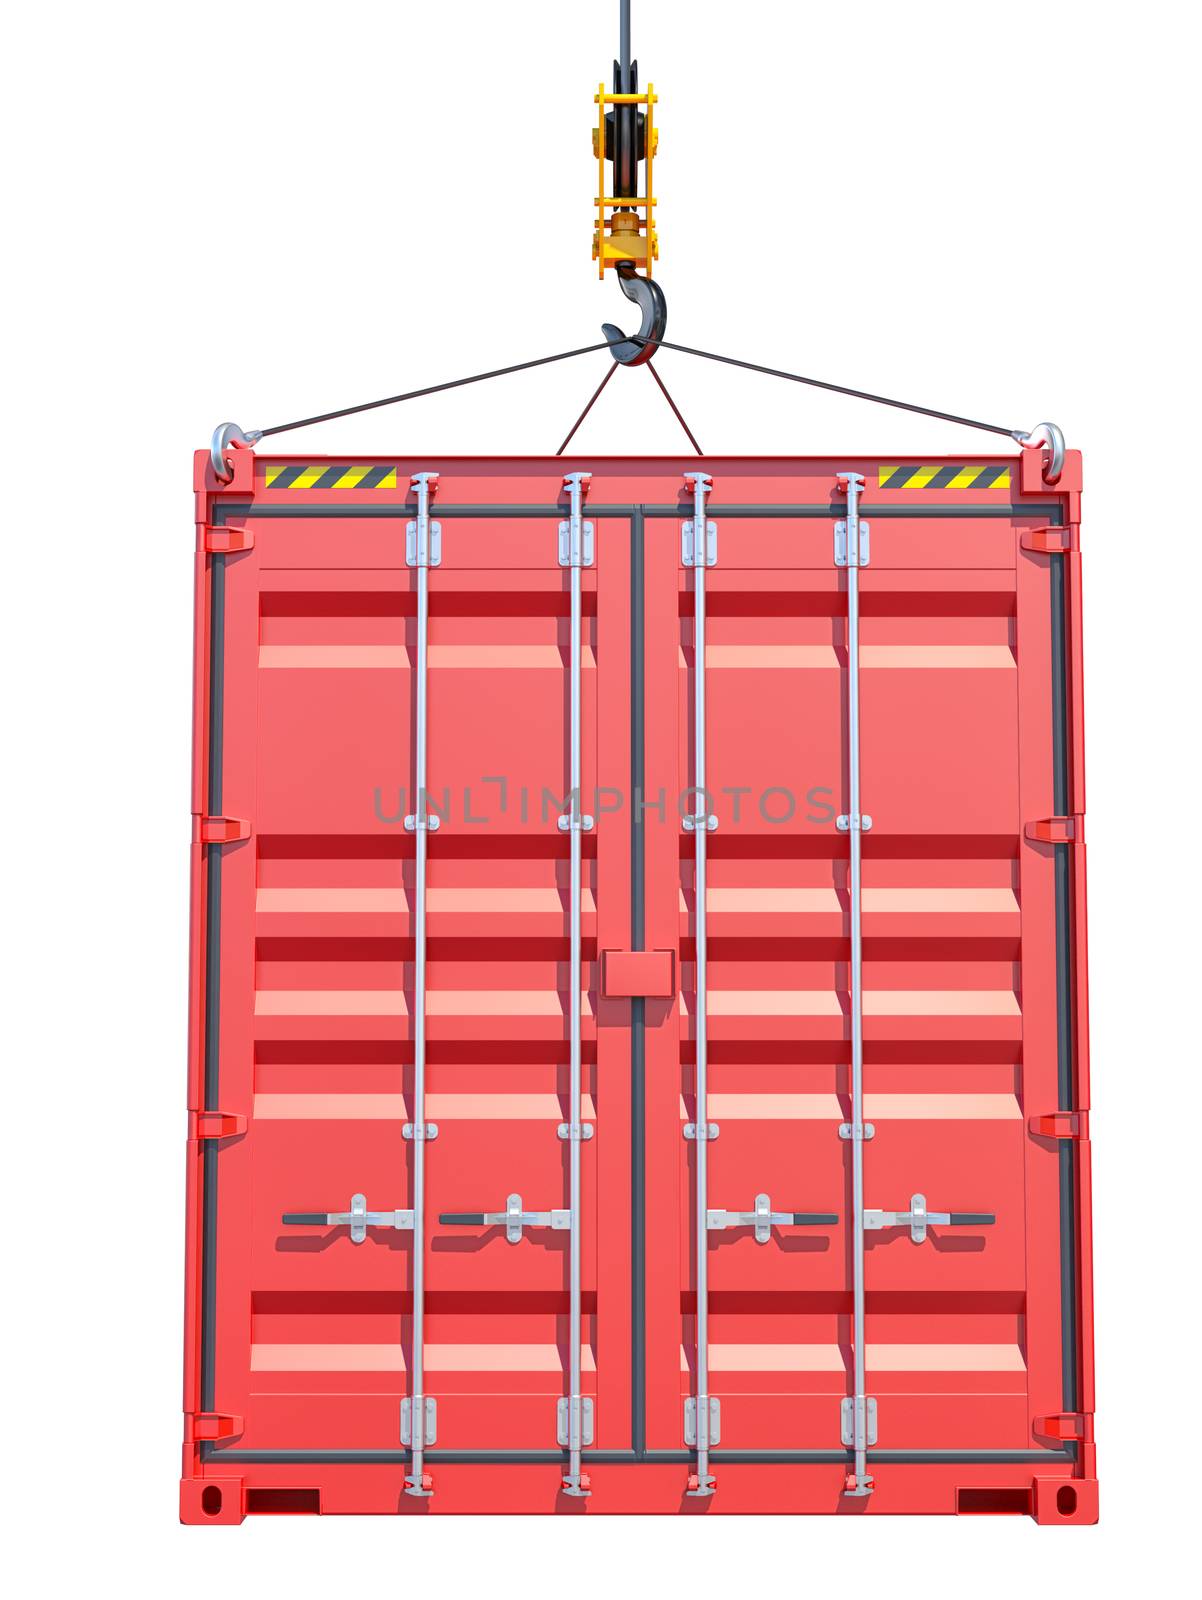 Shipping container. Crane hook. Side view. Isolated on white. 3D rendering